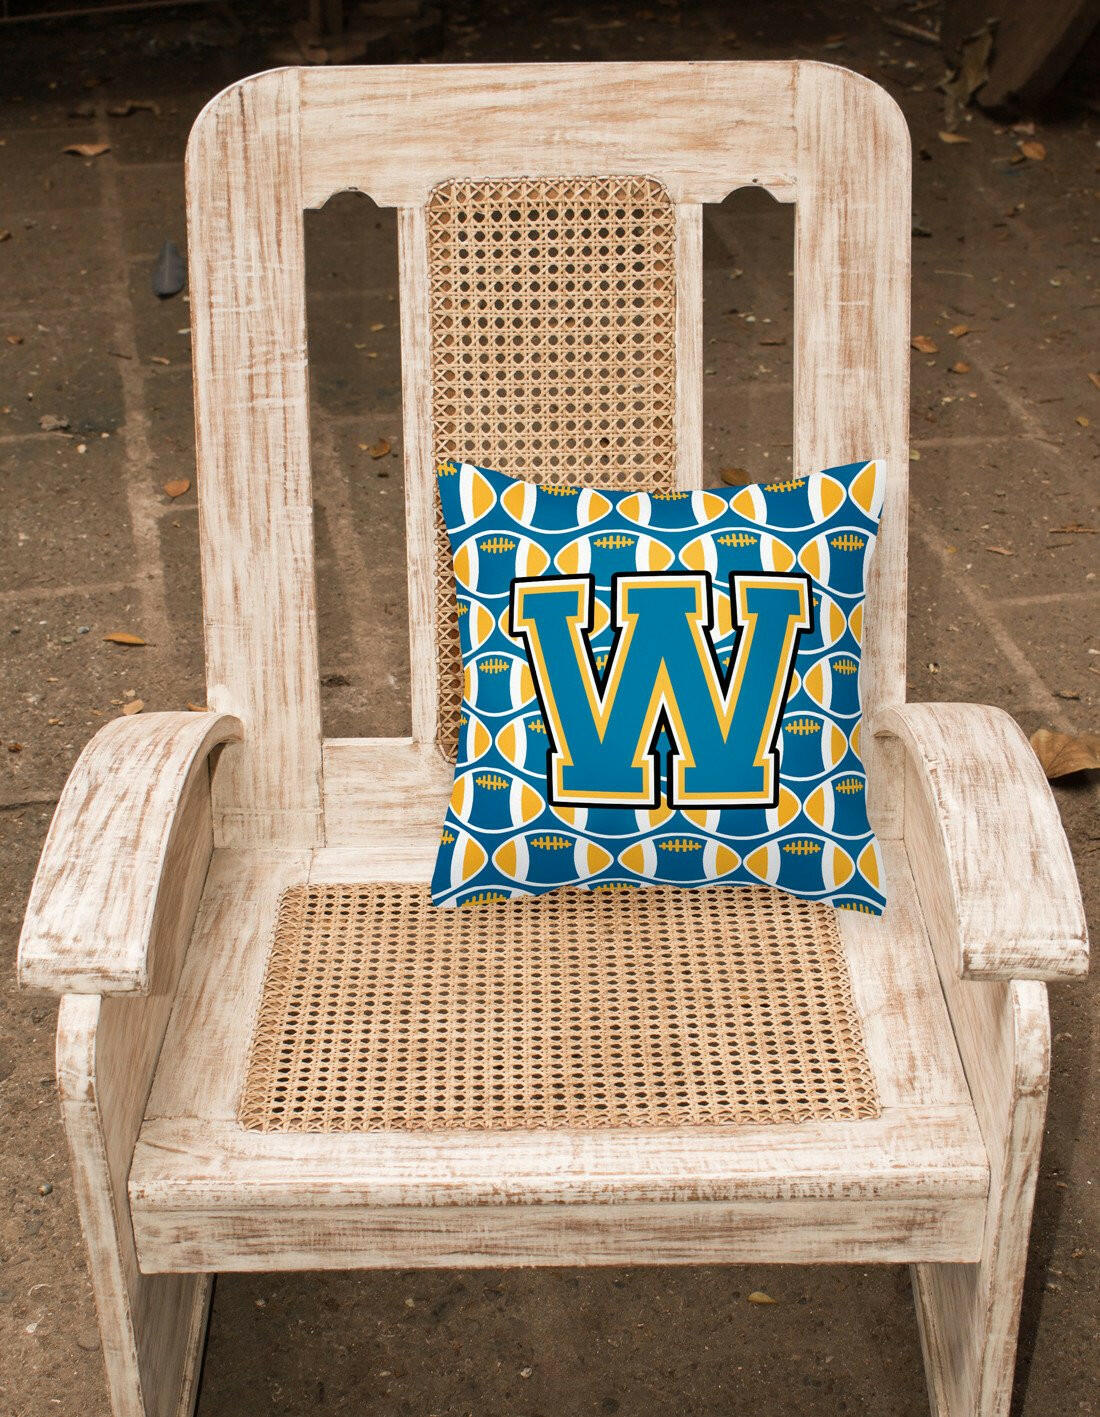 Letter W Football Blue and Gold Fabric Decorative Pillow CJ1077-WPW1414 by Caroline's Treasures